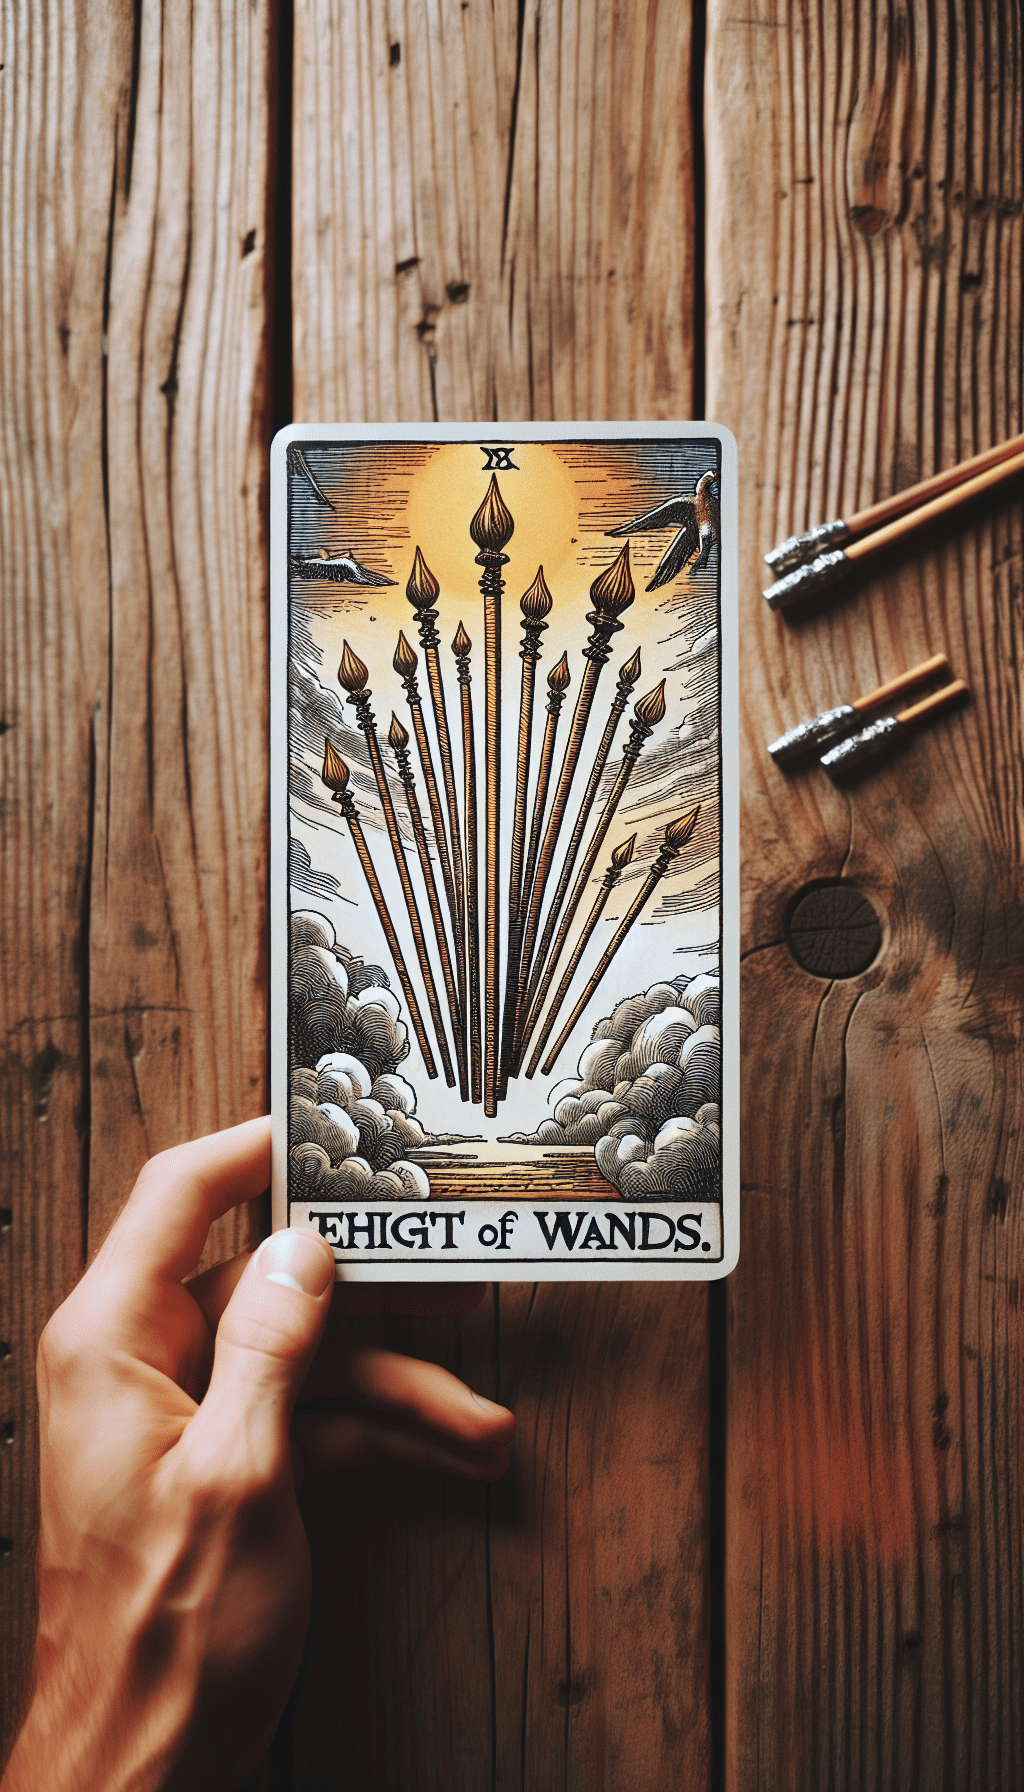 Accelerate Your Creativity: The Eight of Wands in Tarot